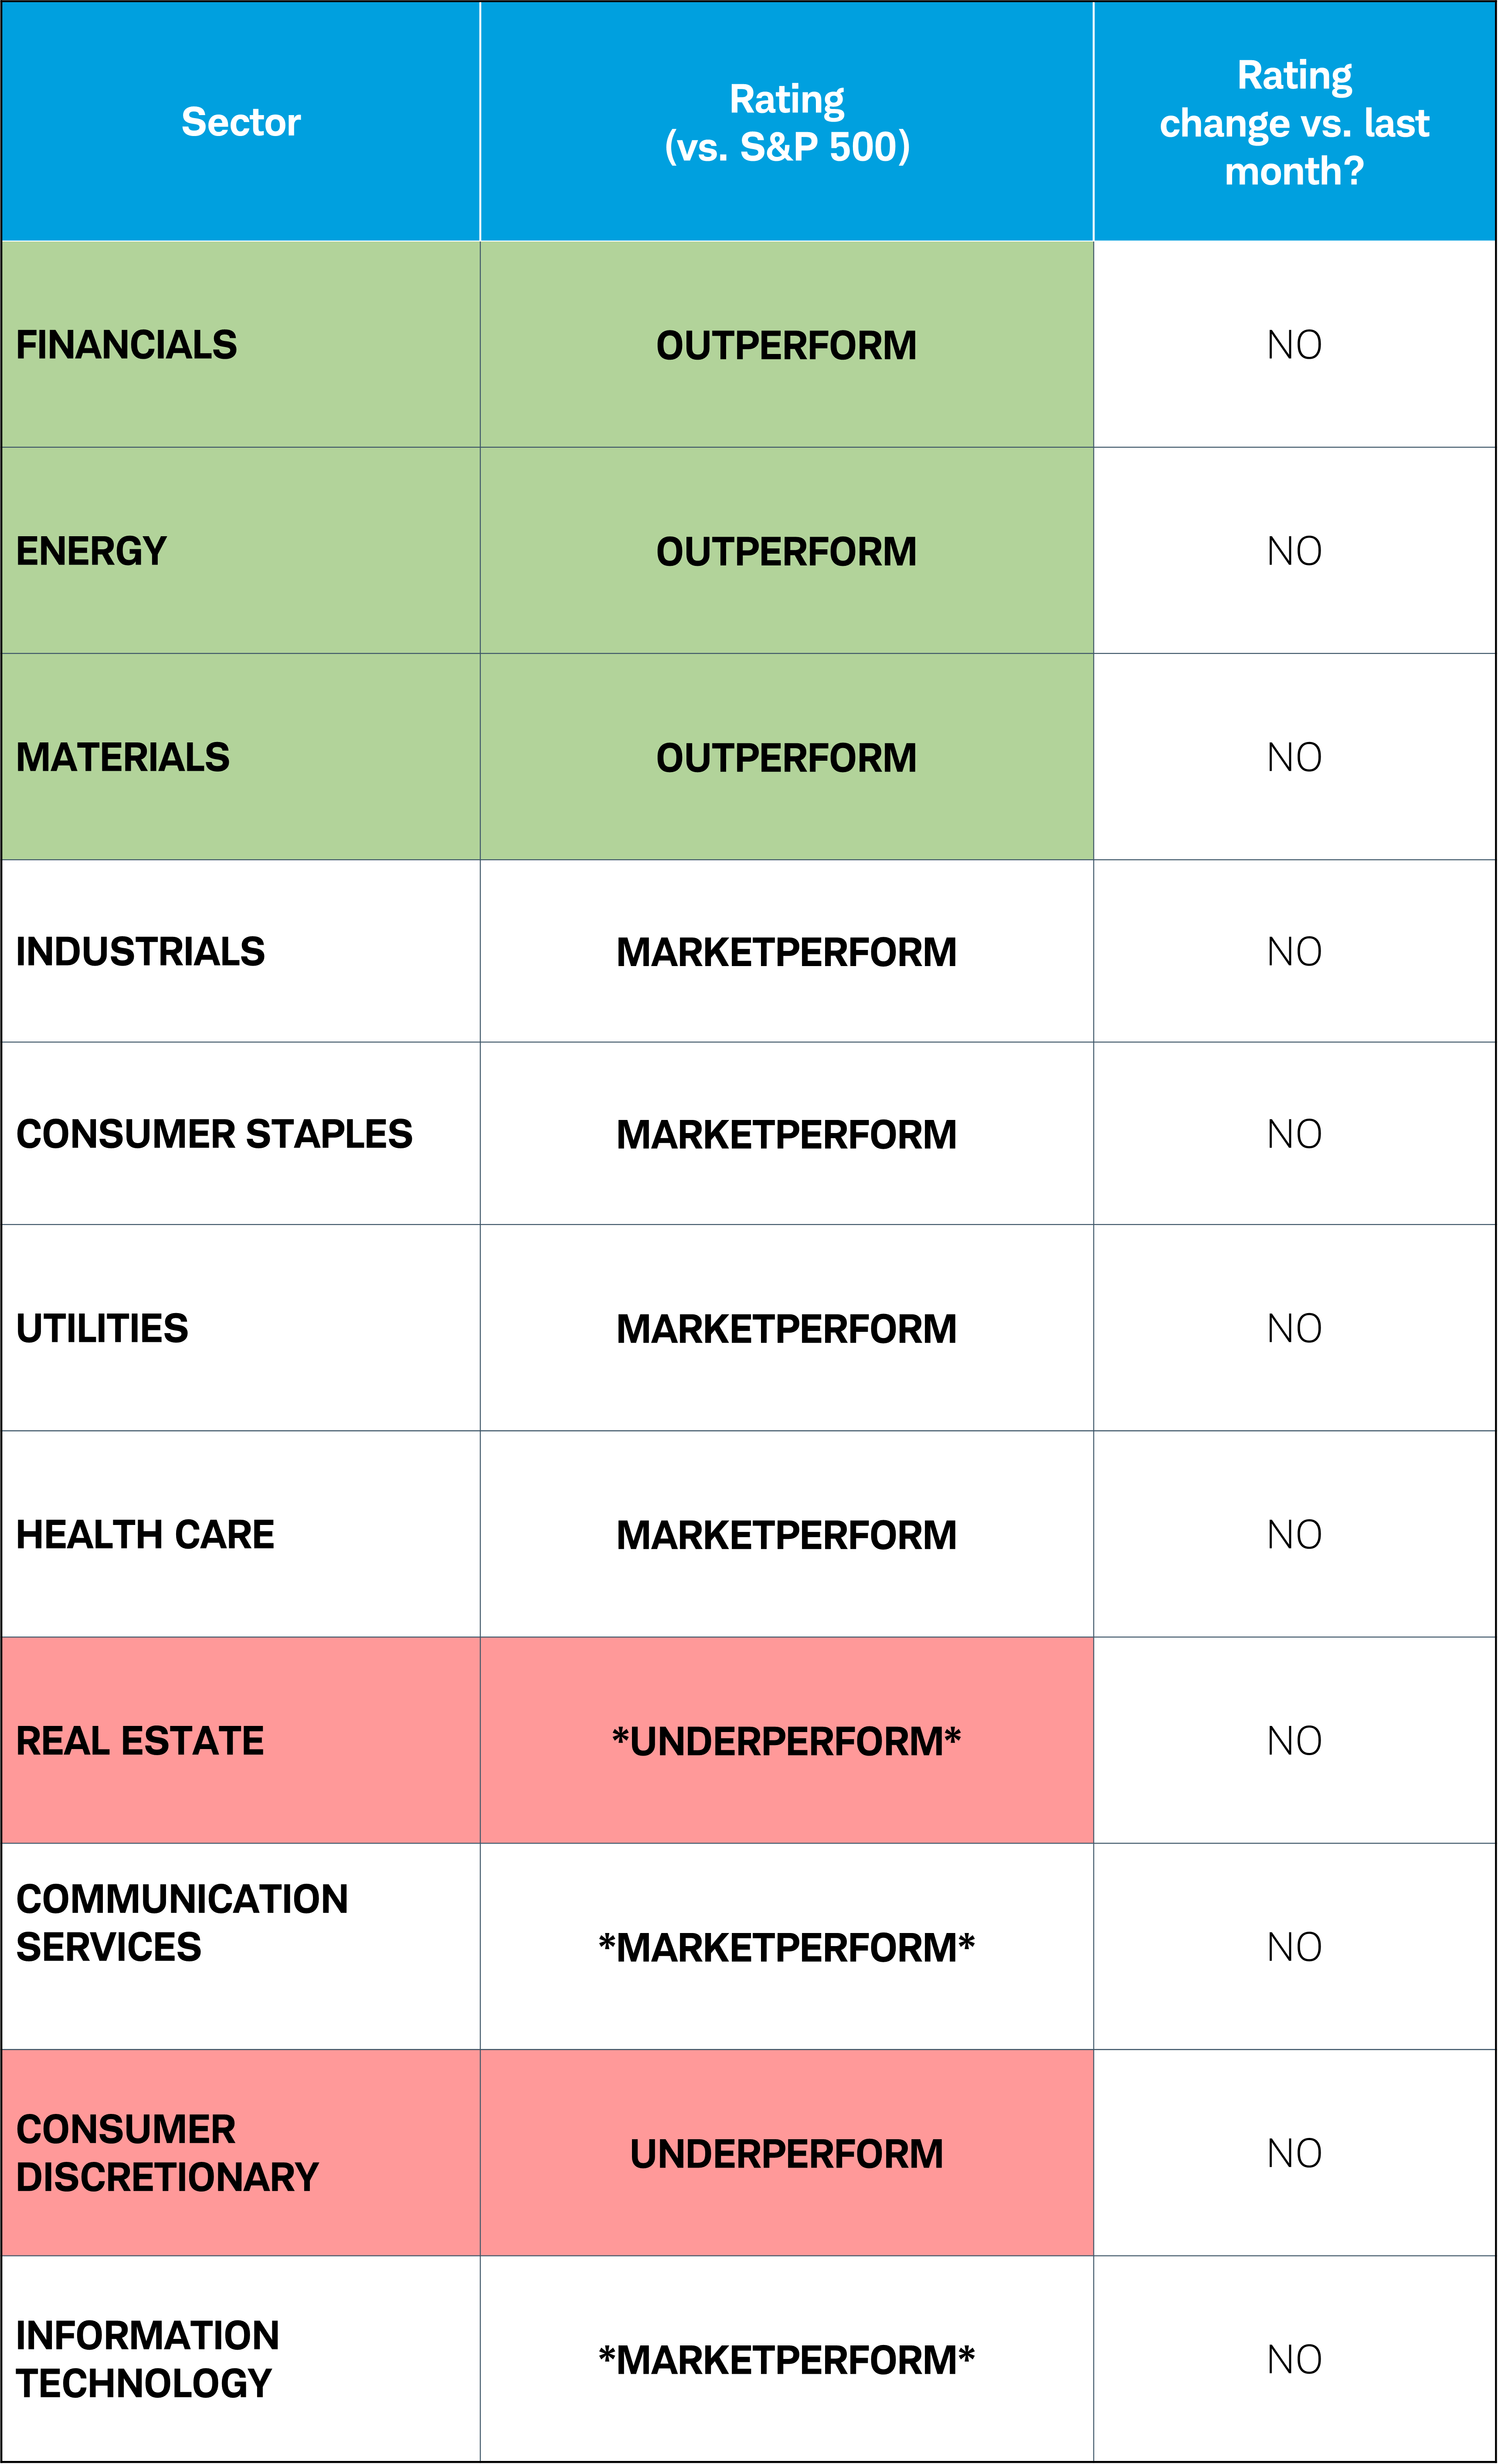 Table shows the Schwab Center for Financial Research's ratings for the 11 equity sectors. Currently, Financials, Energy and Materials are rated outperform. Real Estate and Consumer Discretionary are rated underperform. Industrials, Utilities, Consumer Staples, Health Care, Communication Services and Information Technology are rated Marketperform. 